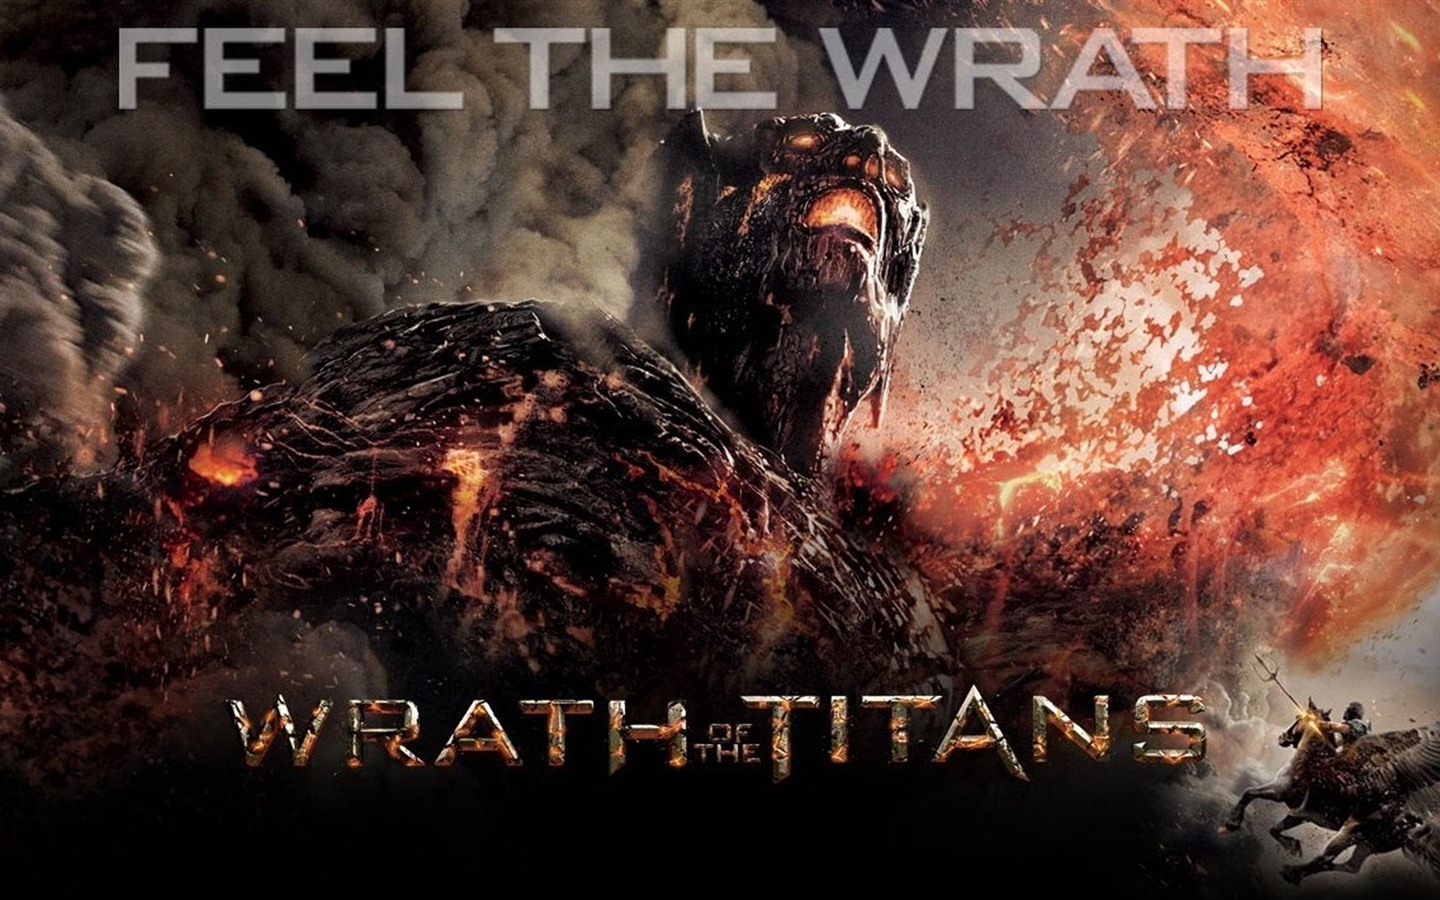 Wrath of the Titans HD Wallpapers #9 - 1440x900